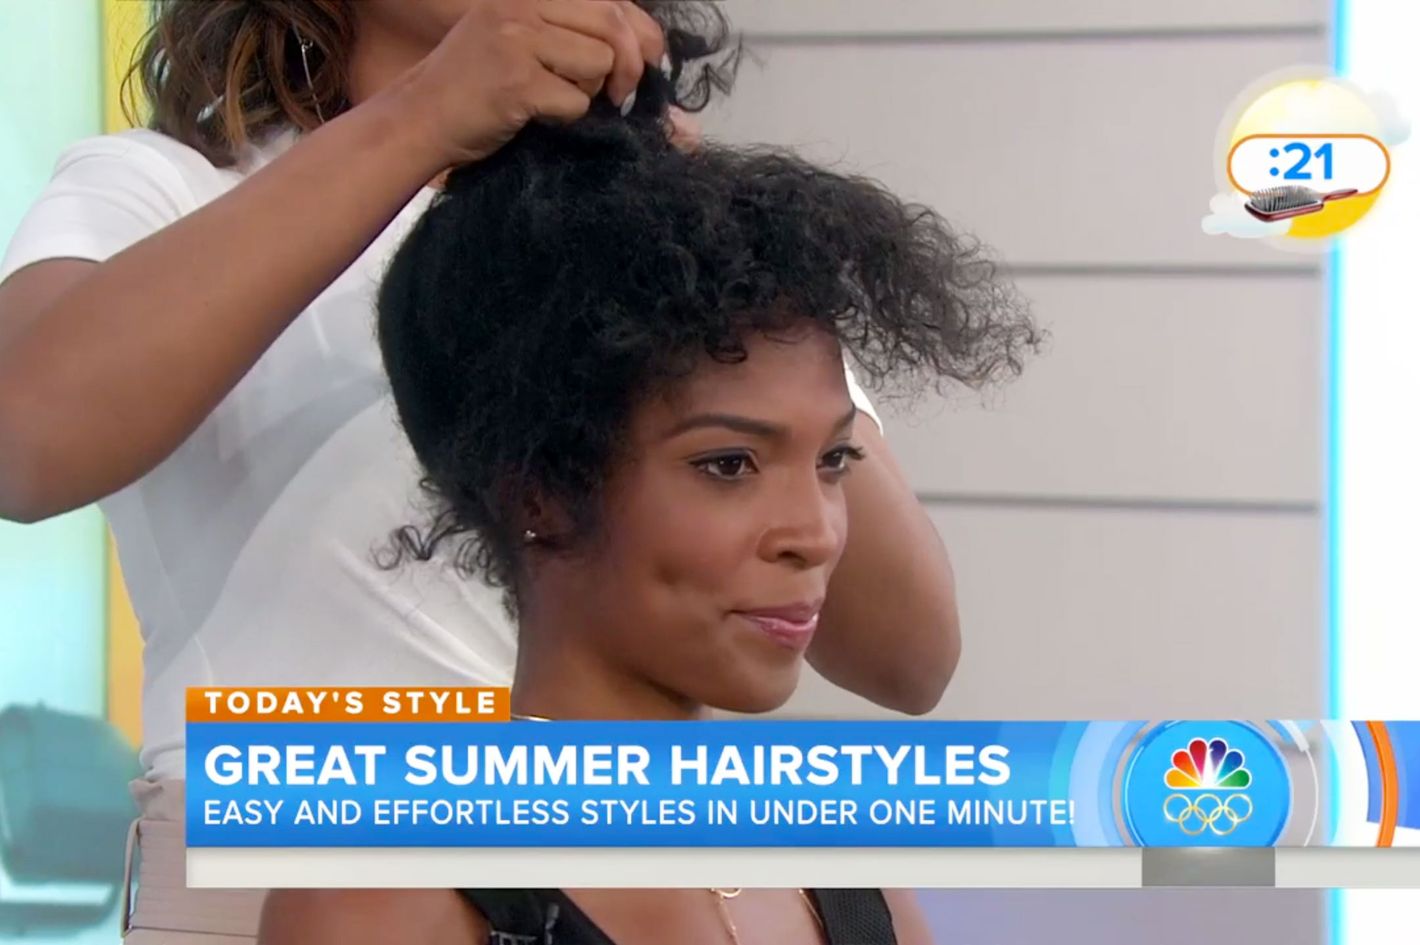 The Real Story Behind That Viral Today Show Natural-Hair Segment